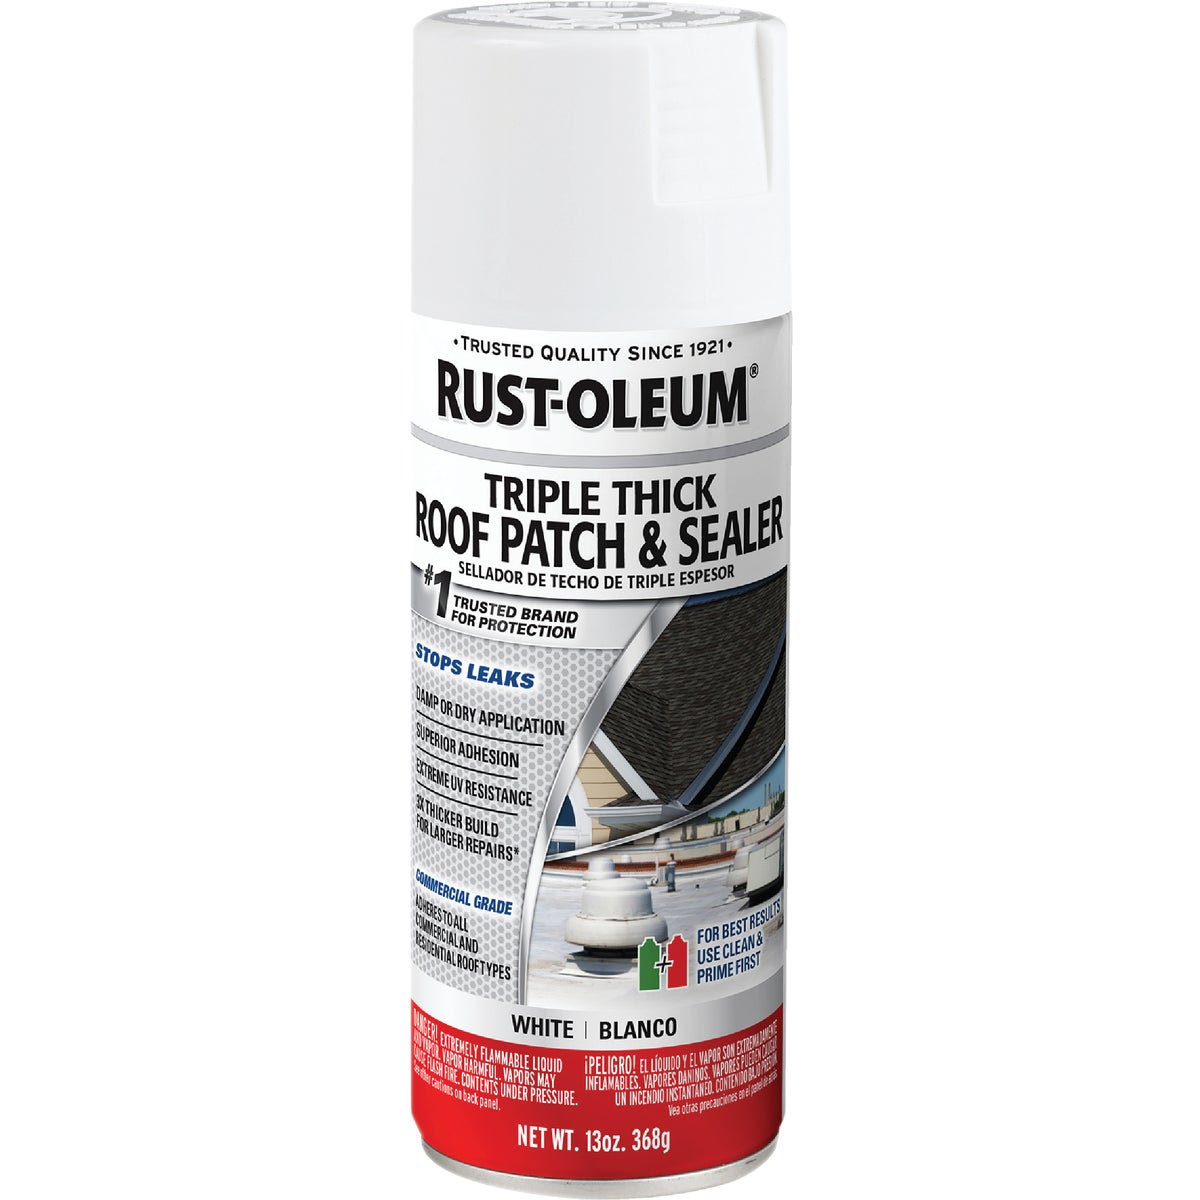 Rust-Oleum 13 Oz. Roofing Triple Thick Roof Patch & Sealer White Spray